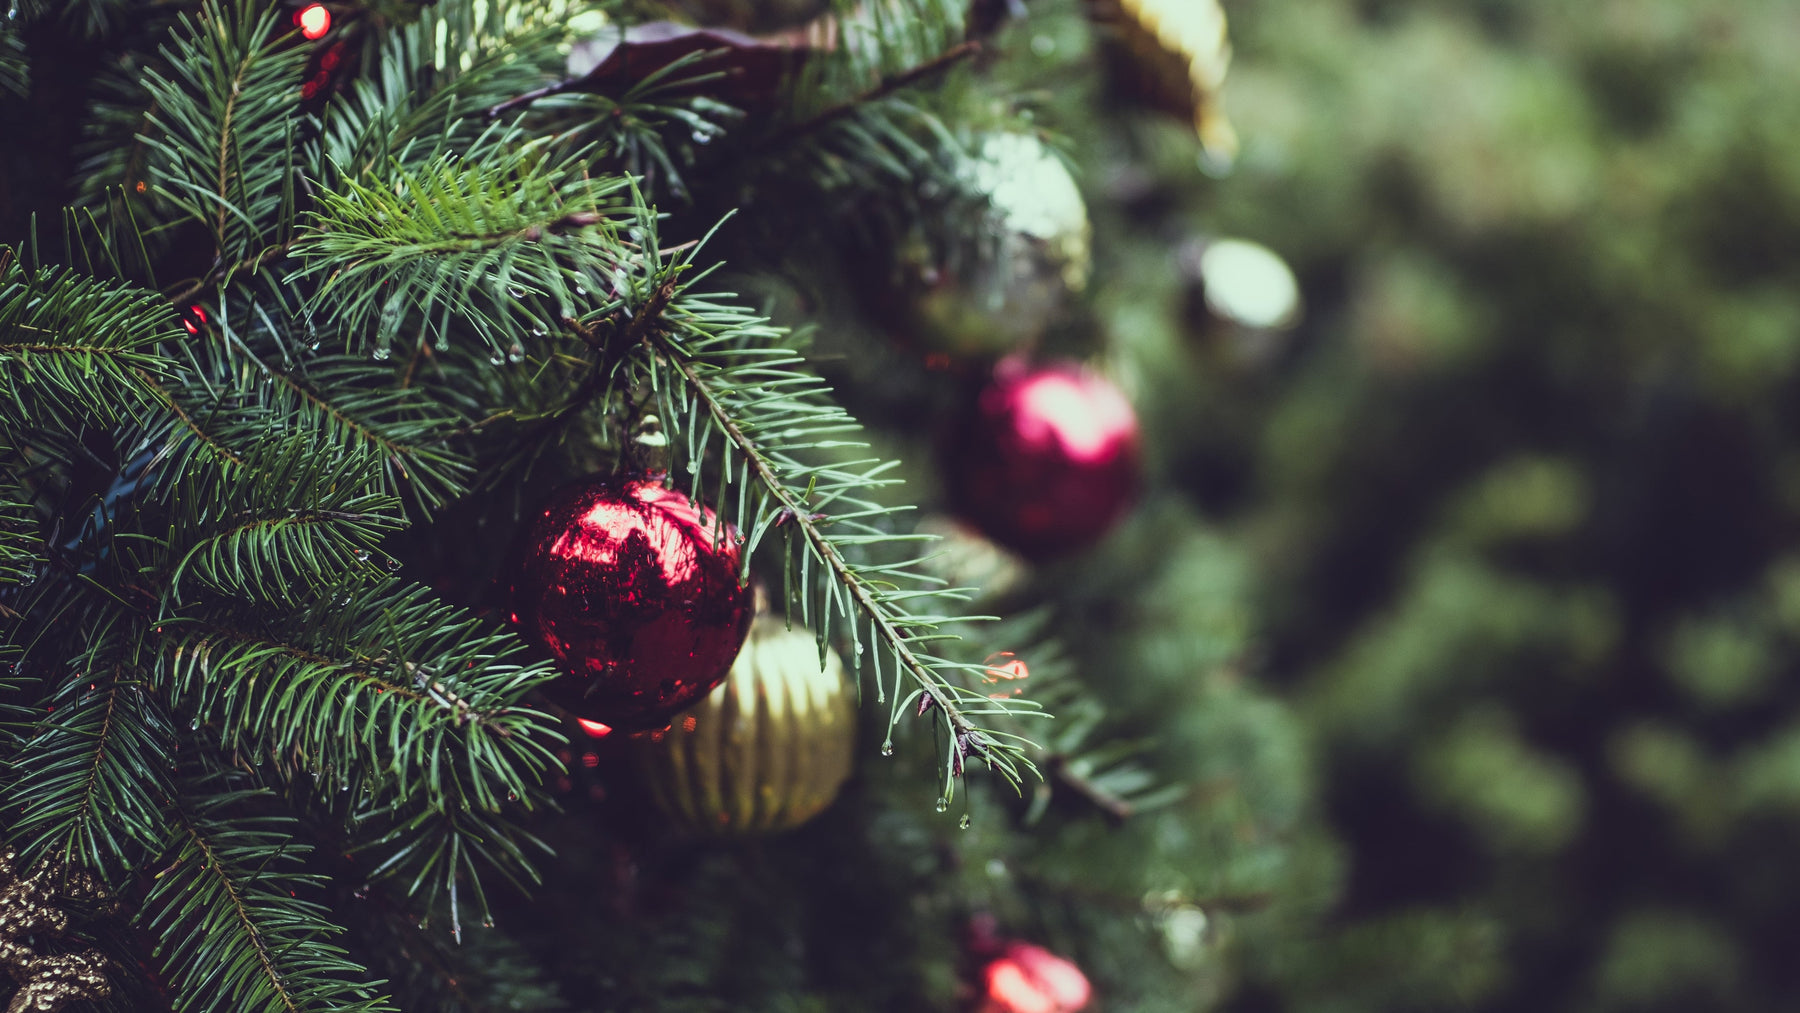 Where To Buy Christmas Trees in Malaysia